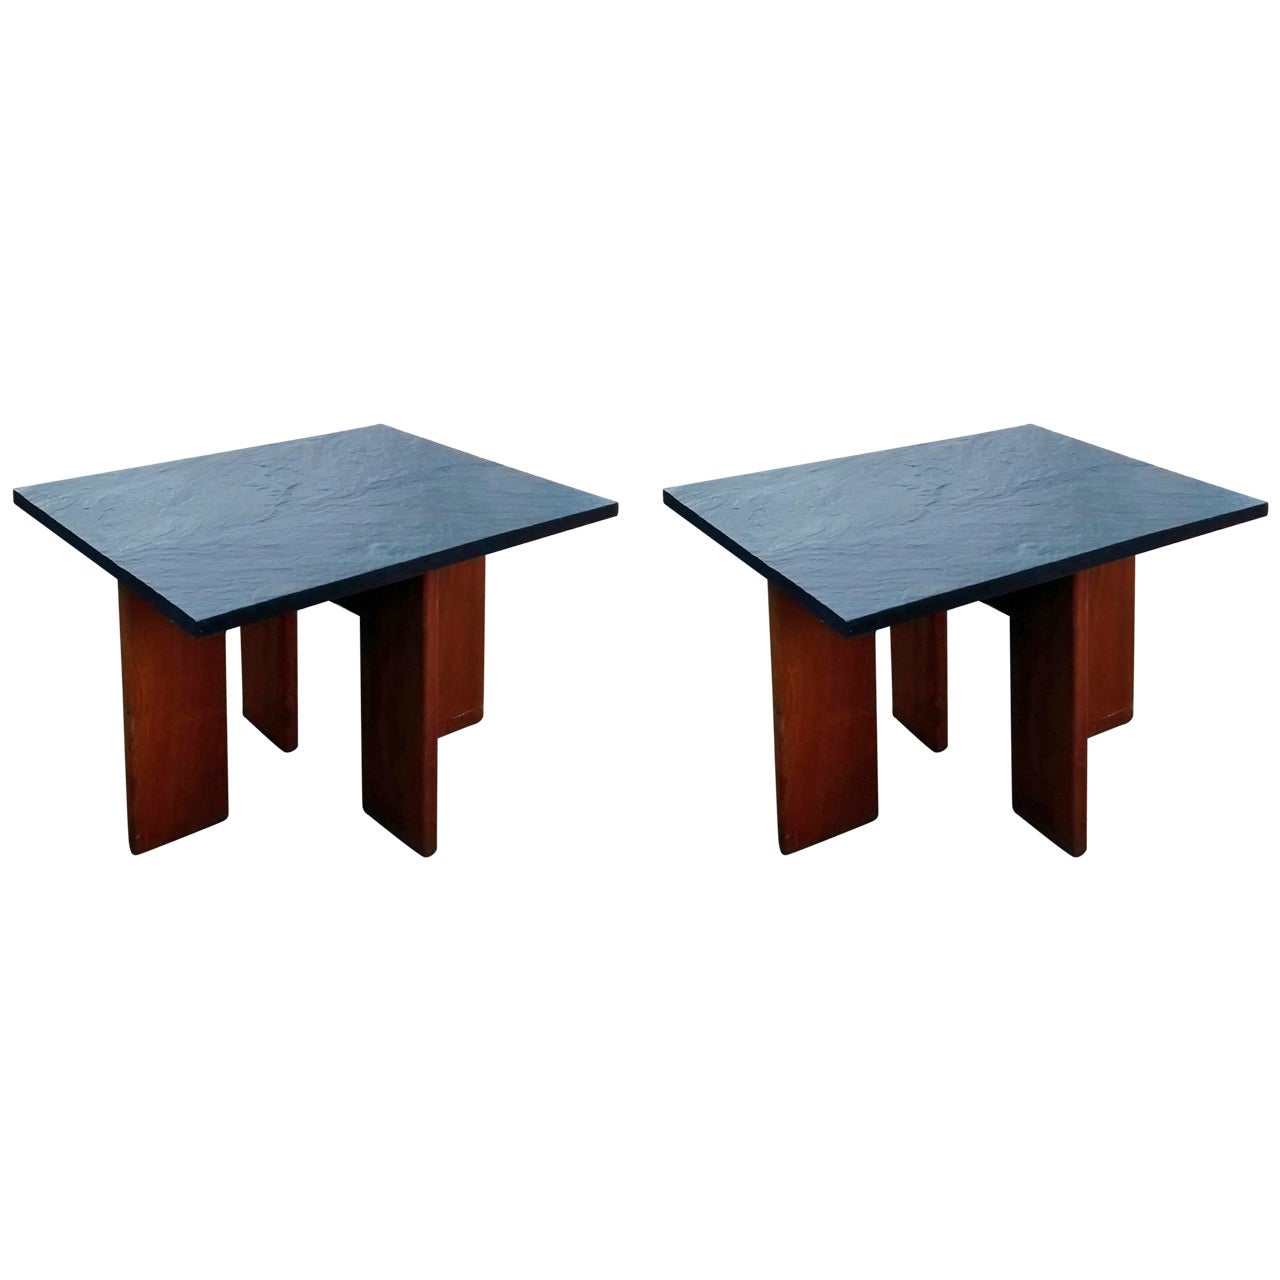 Adrian Pearsall for Craft Associates Pair of Slate-Top End Tables